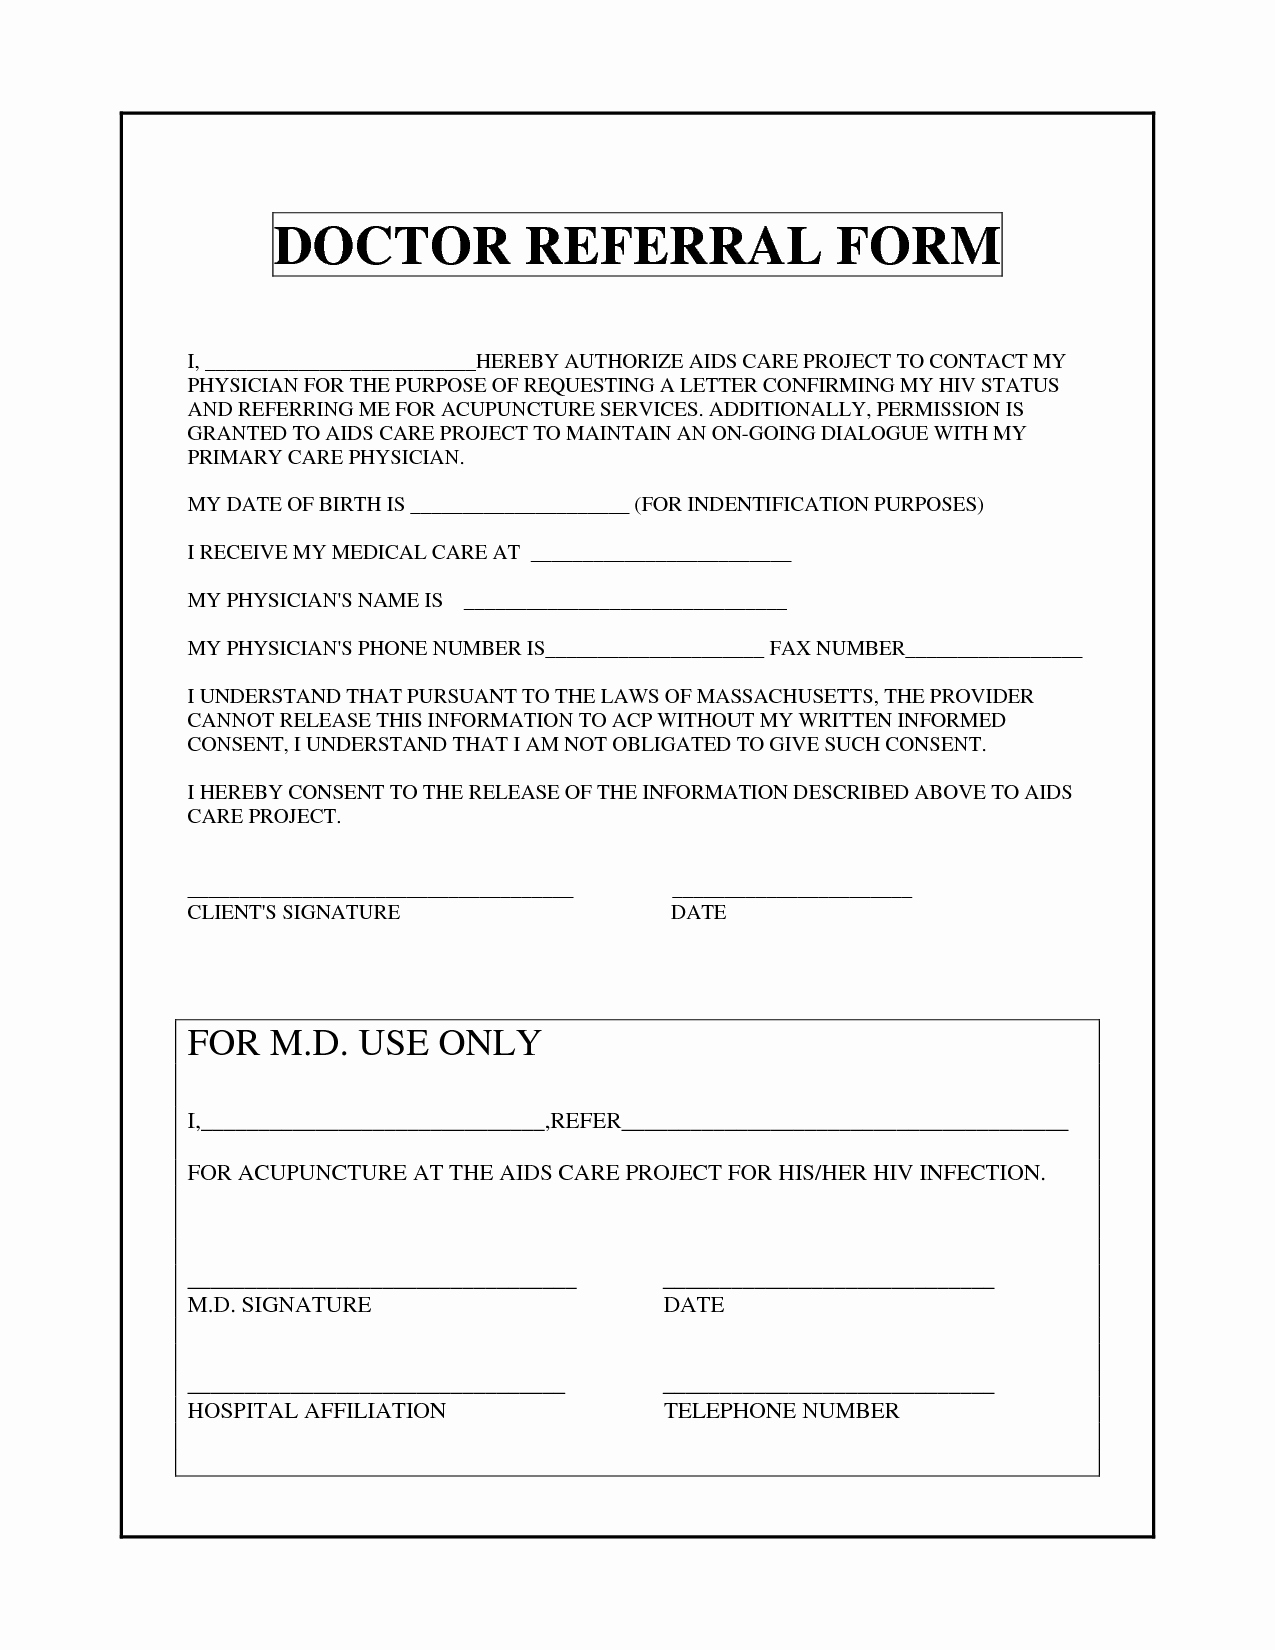 Doctor Referral form Template Lovely Physician Referral form Template Free Download